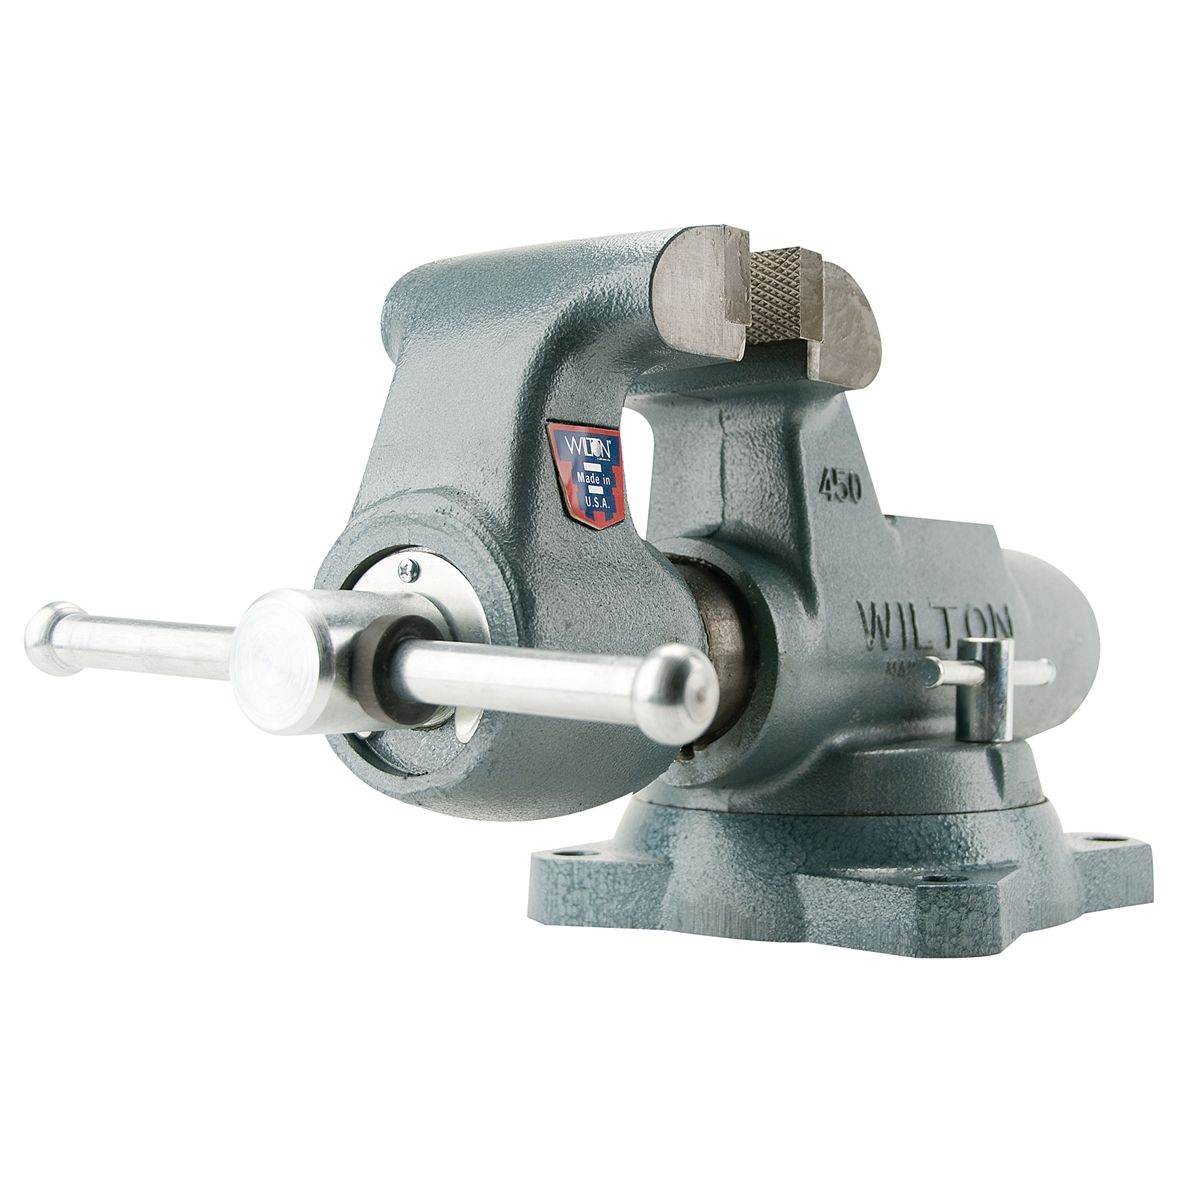 450S Machinists Bench Vise Swivel Base 4 1/2 Inch